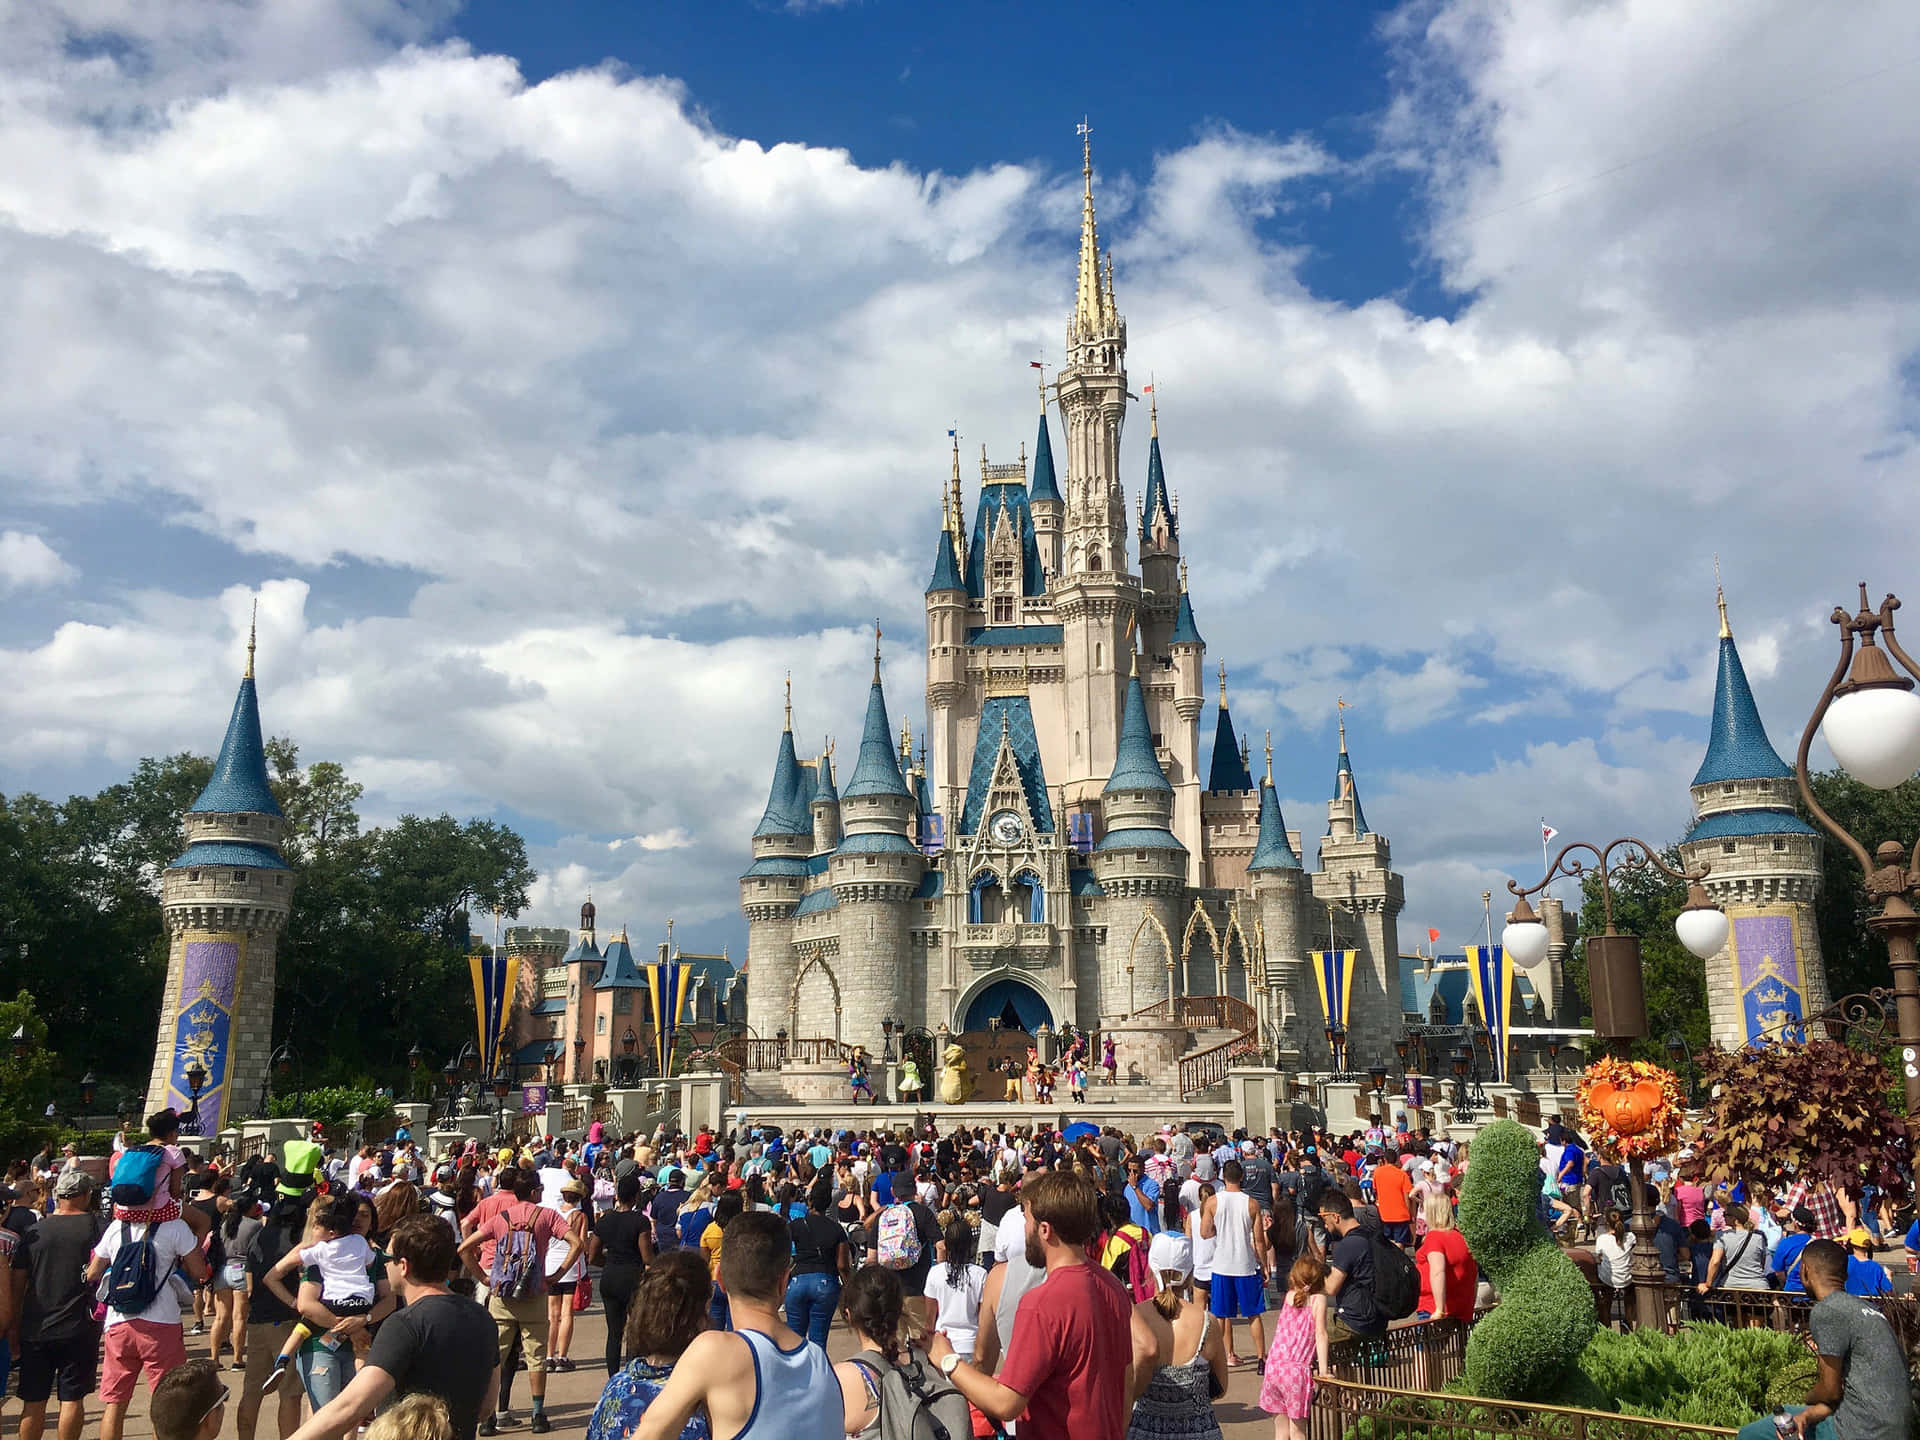 With sweeping views of the dazzling Cinderella Castle, Disney World is the ultimate family destination.